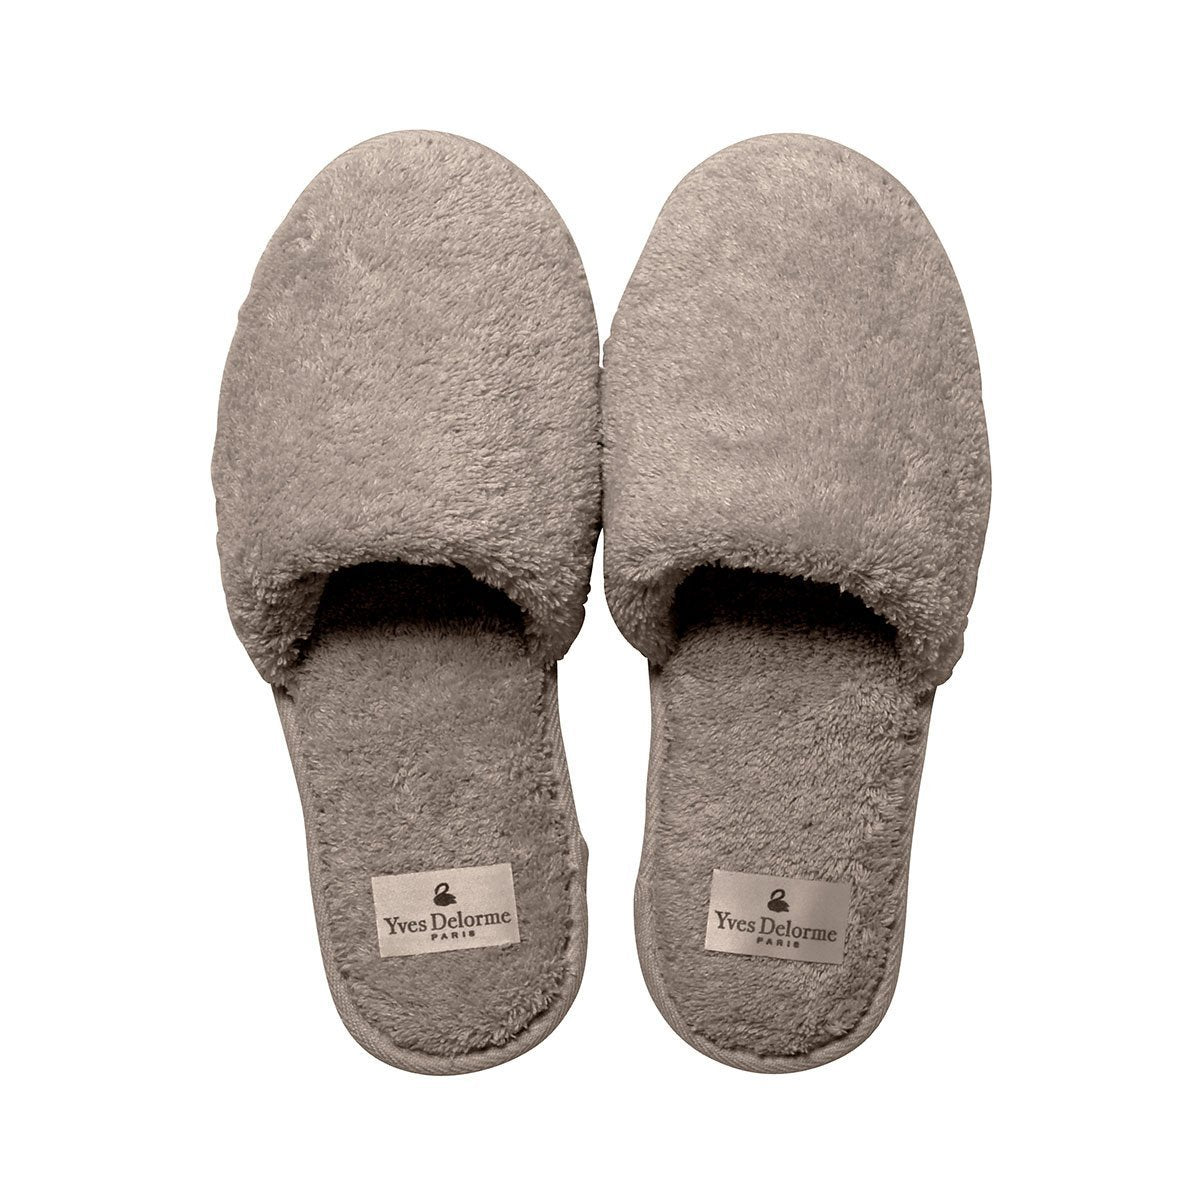 Etoile Pierre Men's Slippers by Yves Delorme | Fig Linens